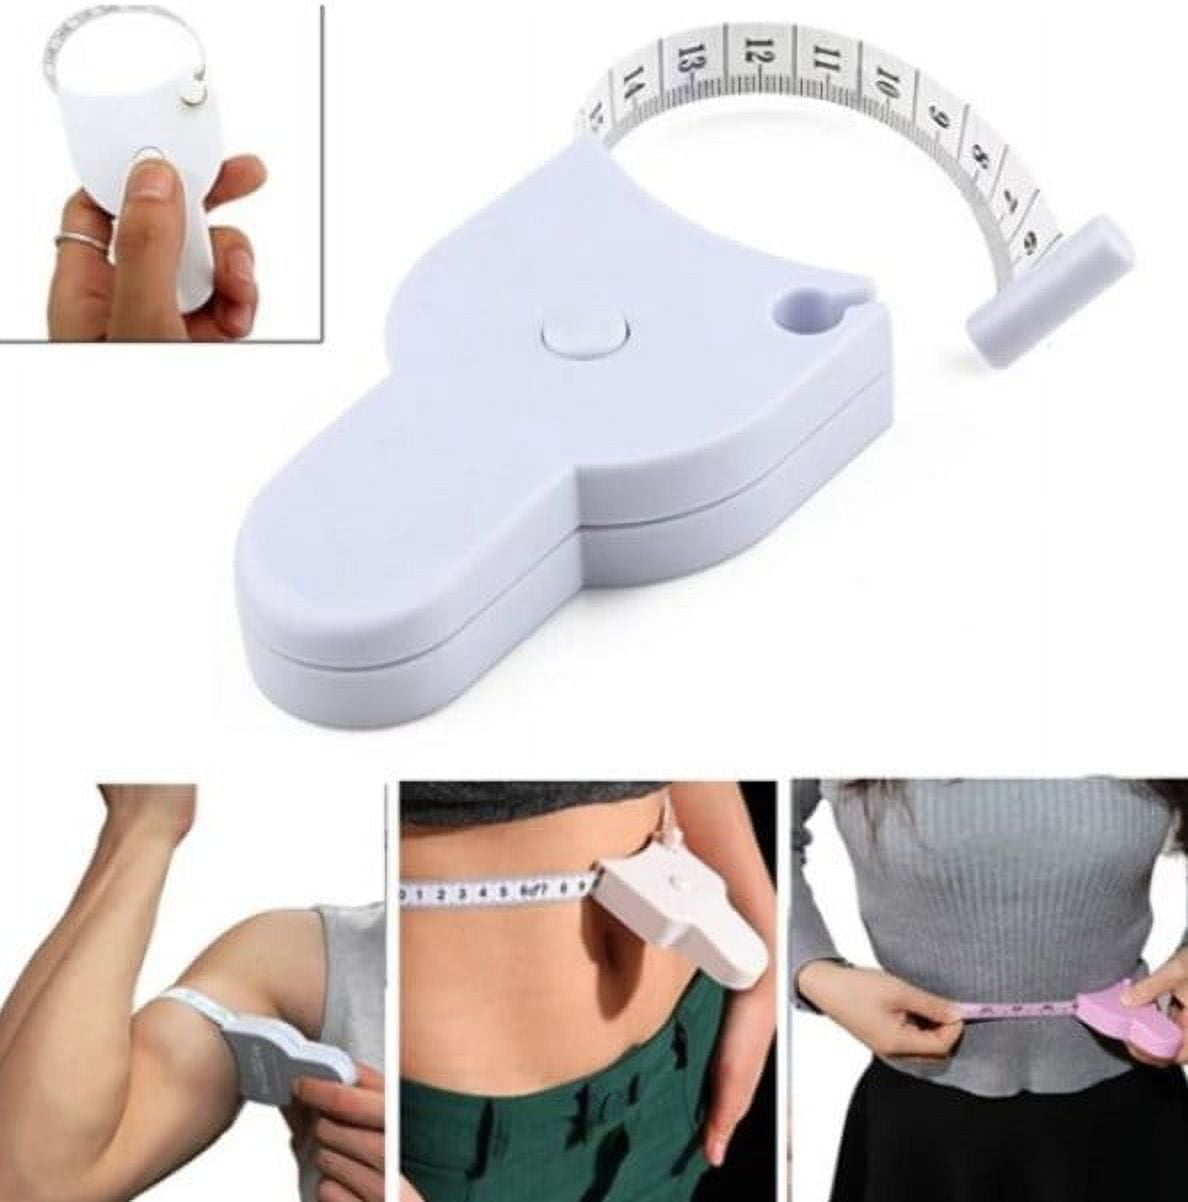 Body Tape Measure for Measuring Waist Diet Weight Loss Aid Arm